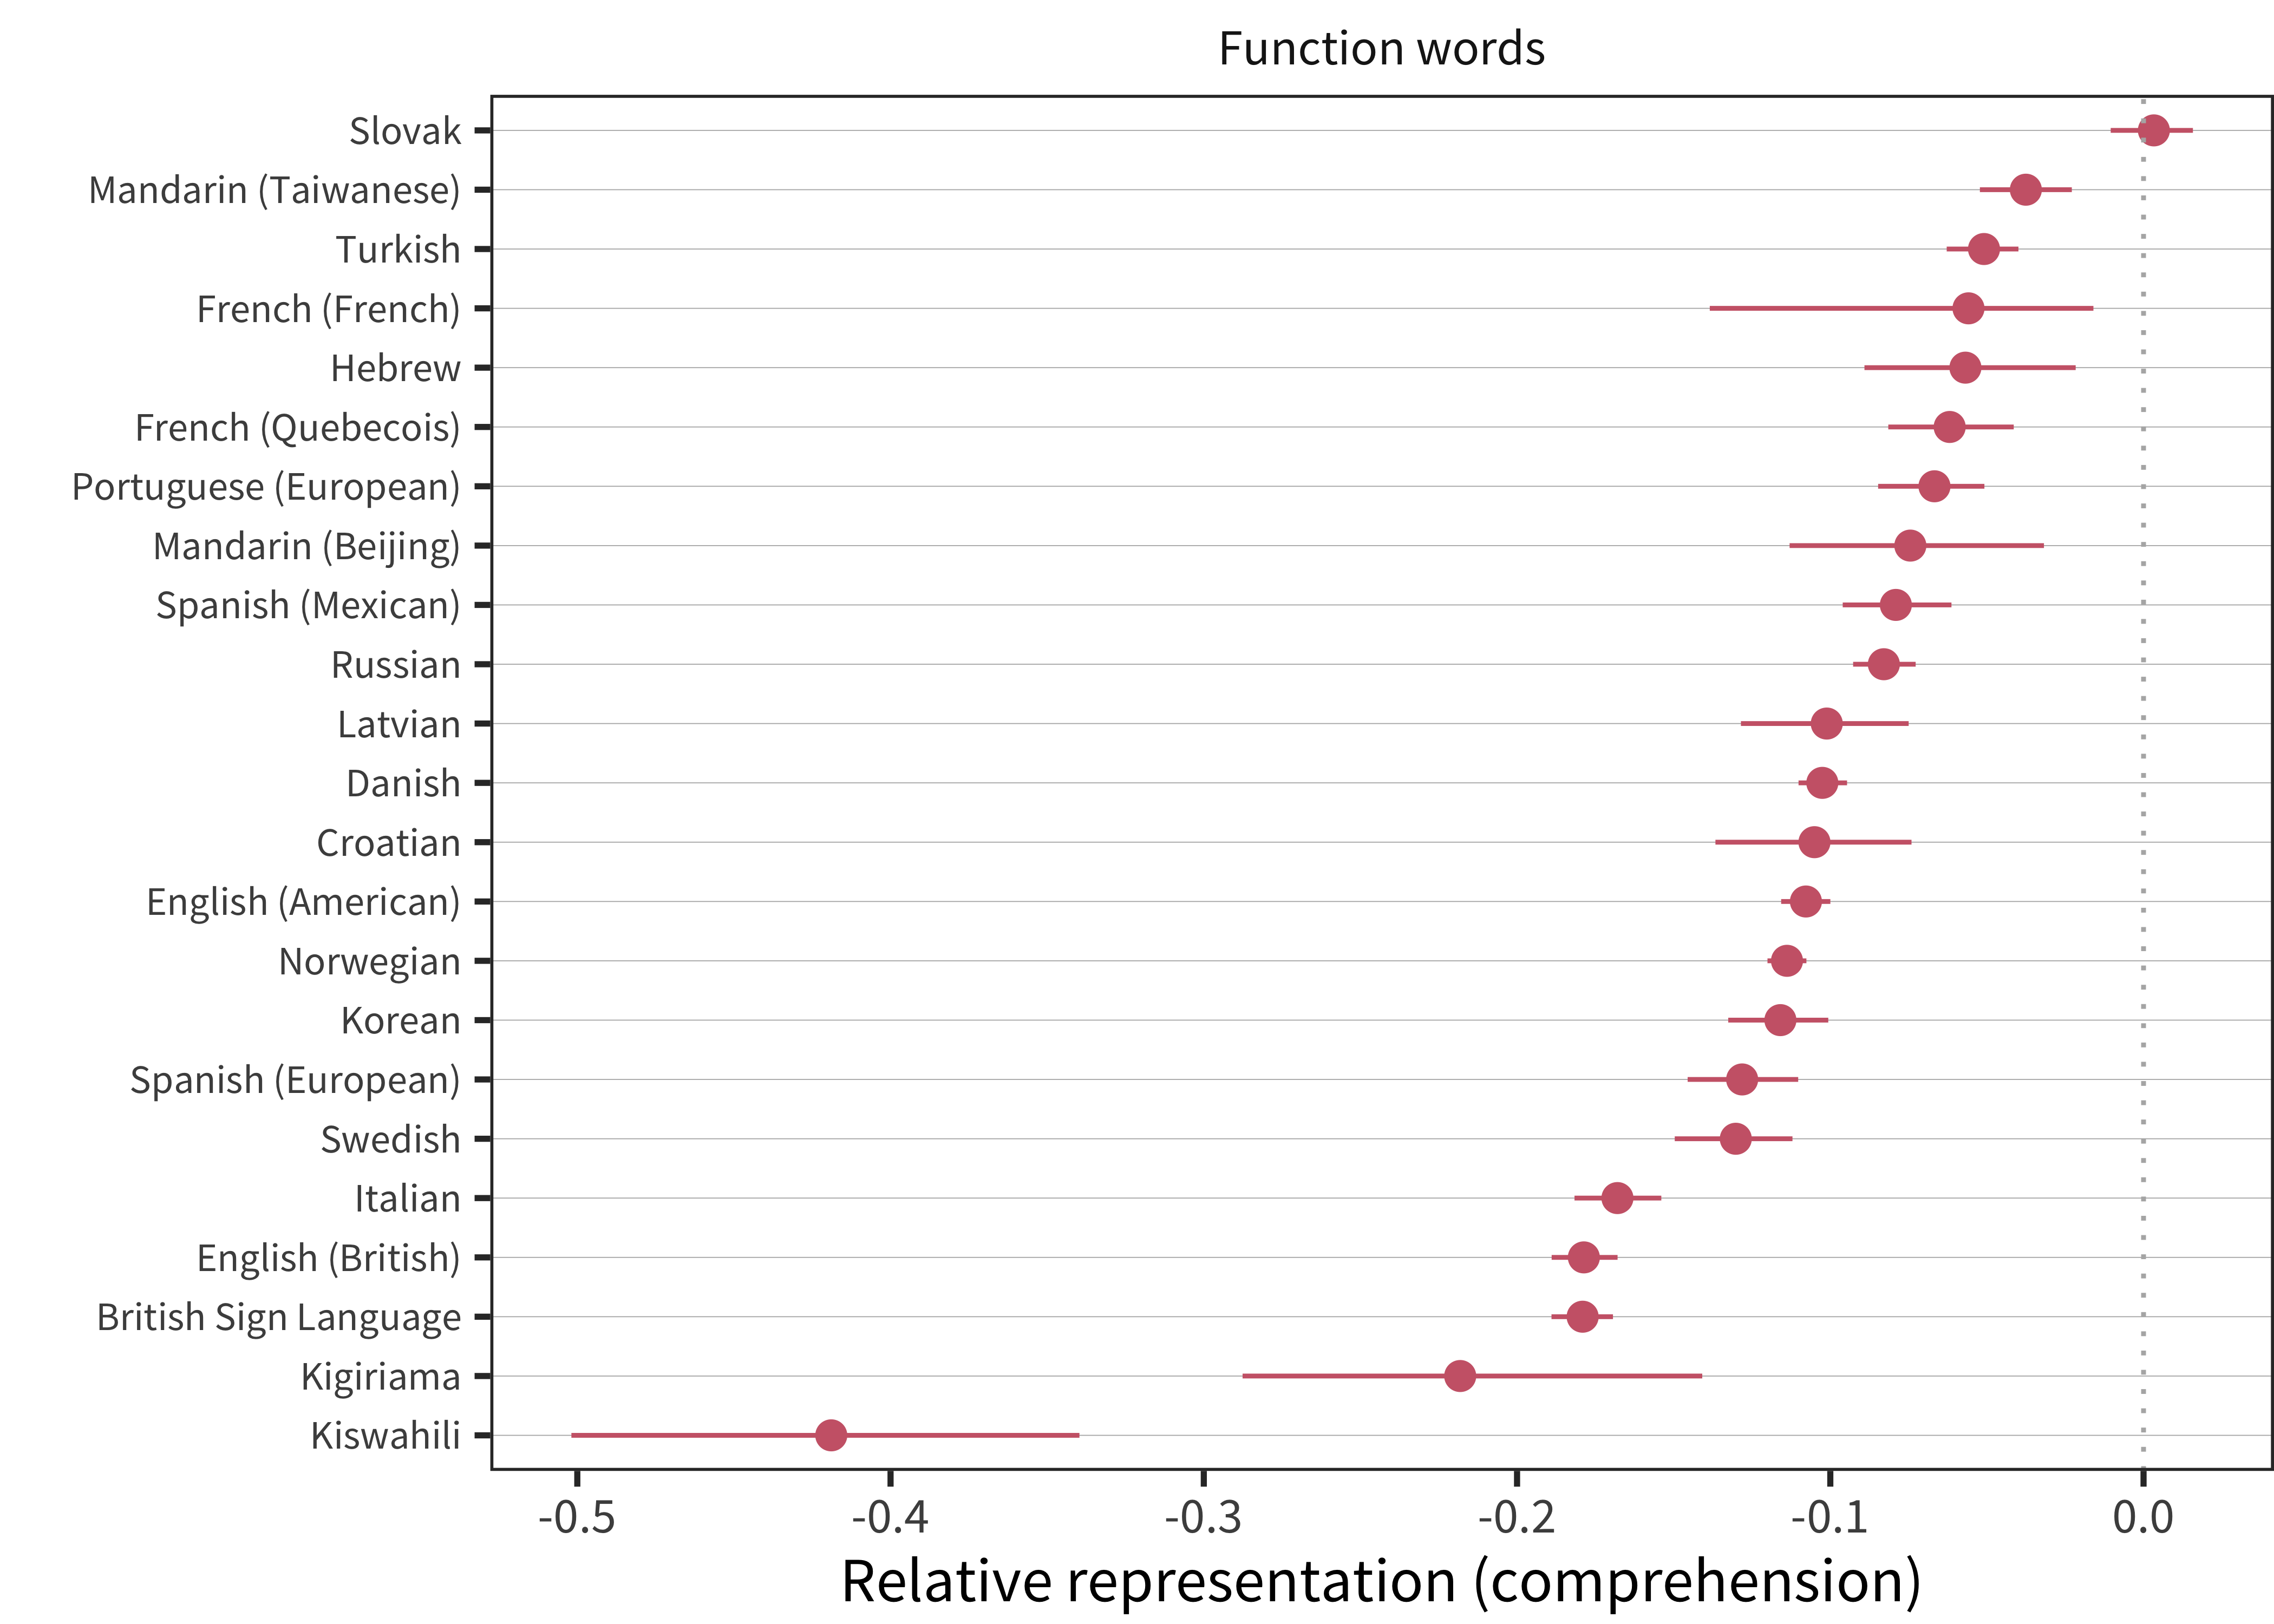 Relative representation in vocabulary compared to chance for function words for comprehension data in each language (line ranges indicate bootstrapped 95\% confidence intervals).